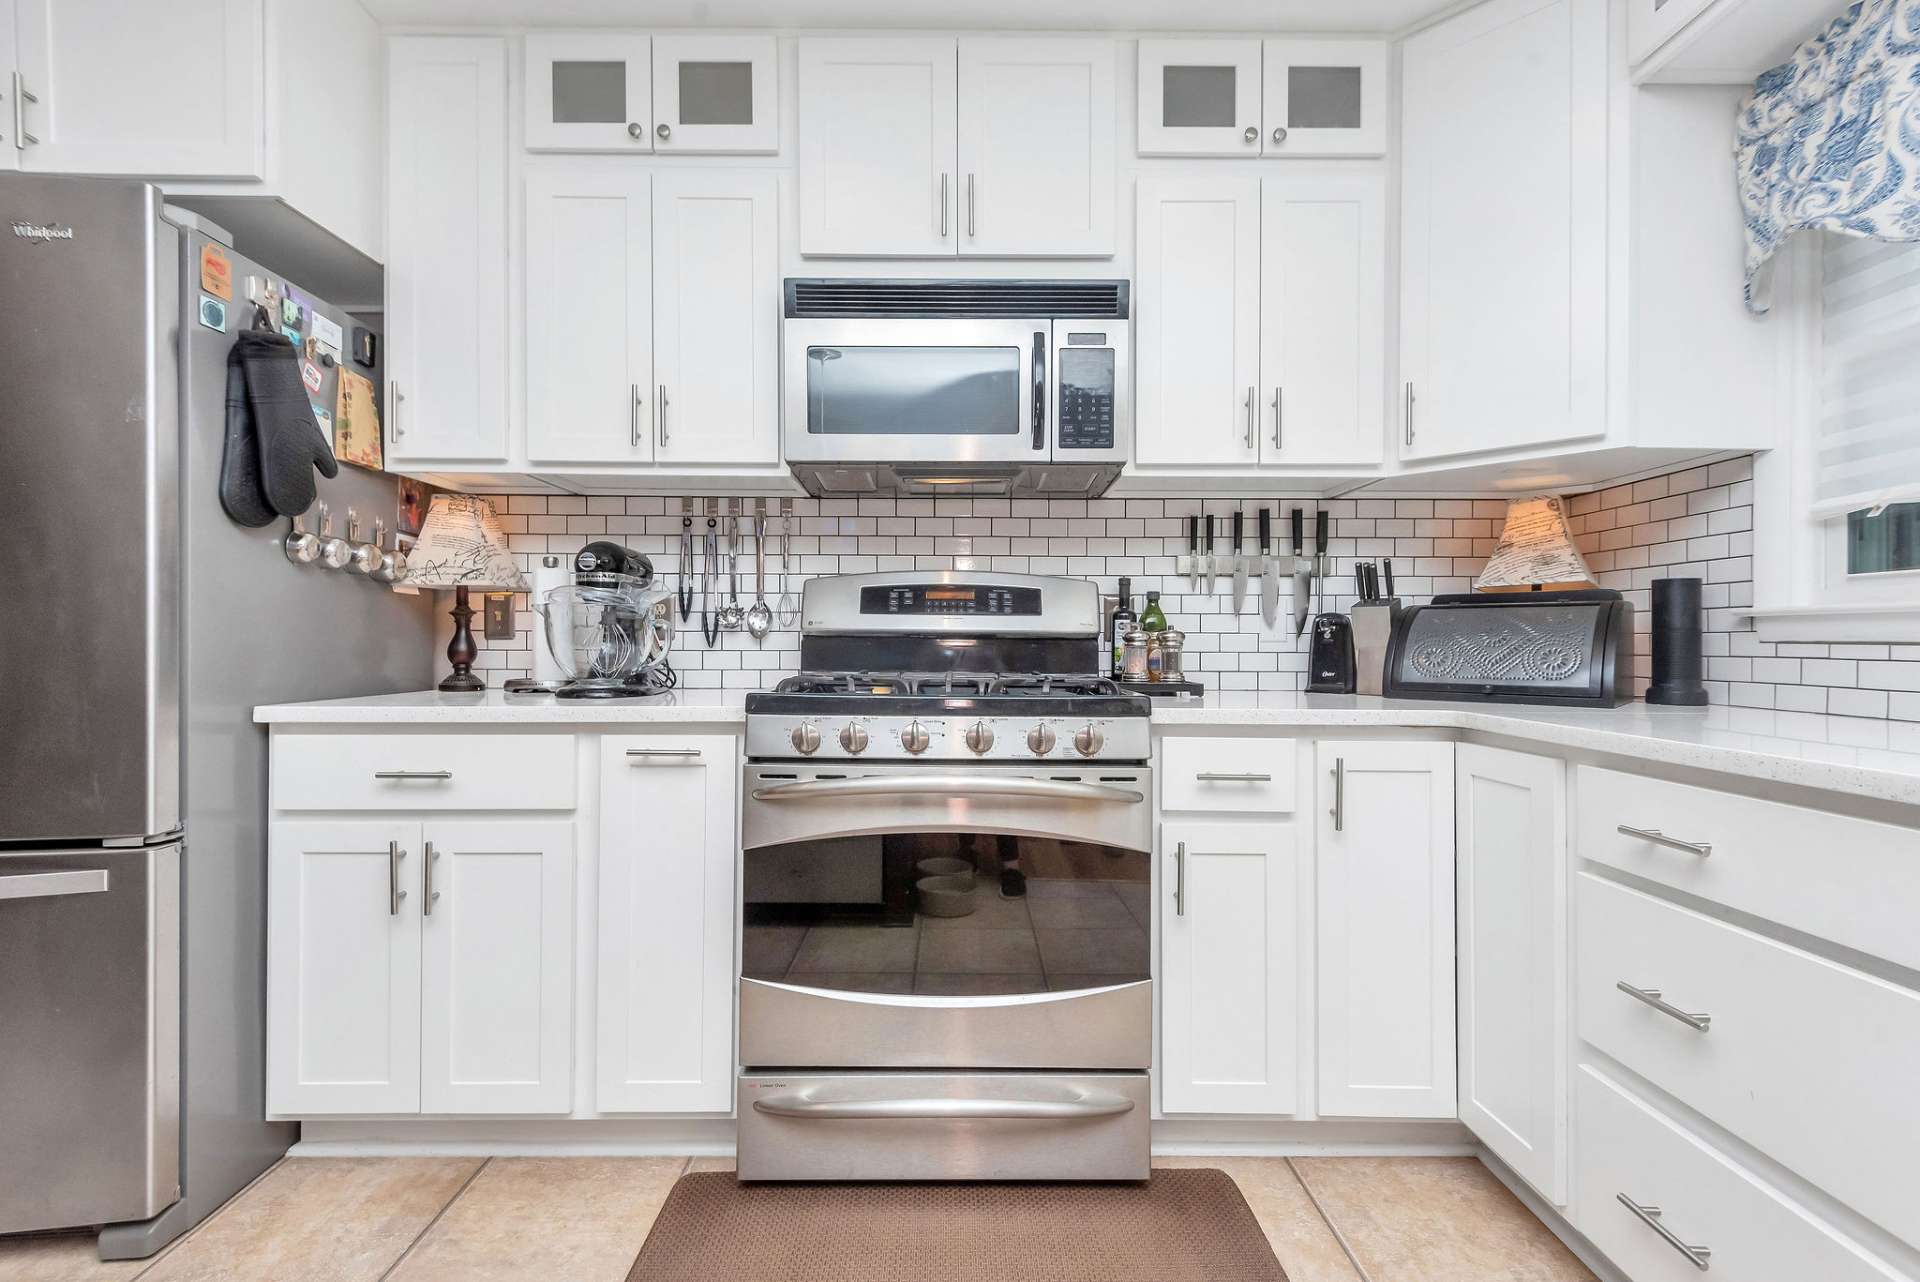 The beautiful upgraded custom kitchen features stainless appliances including this combination gas and electric stove